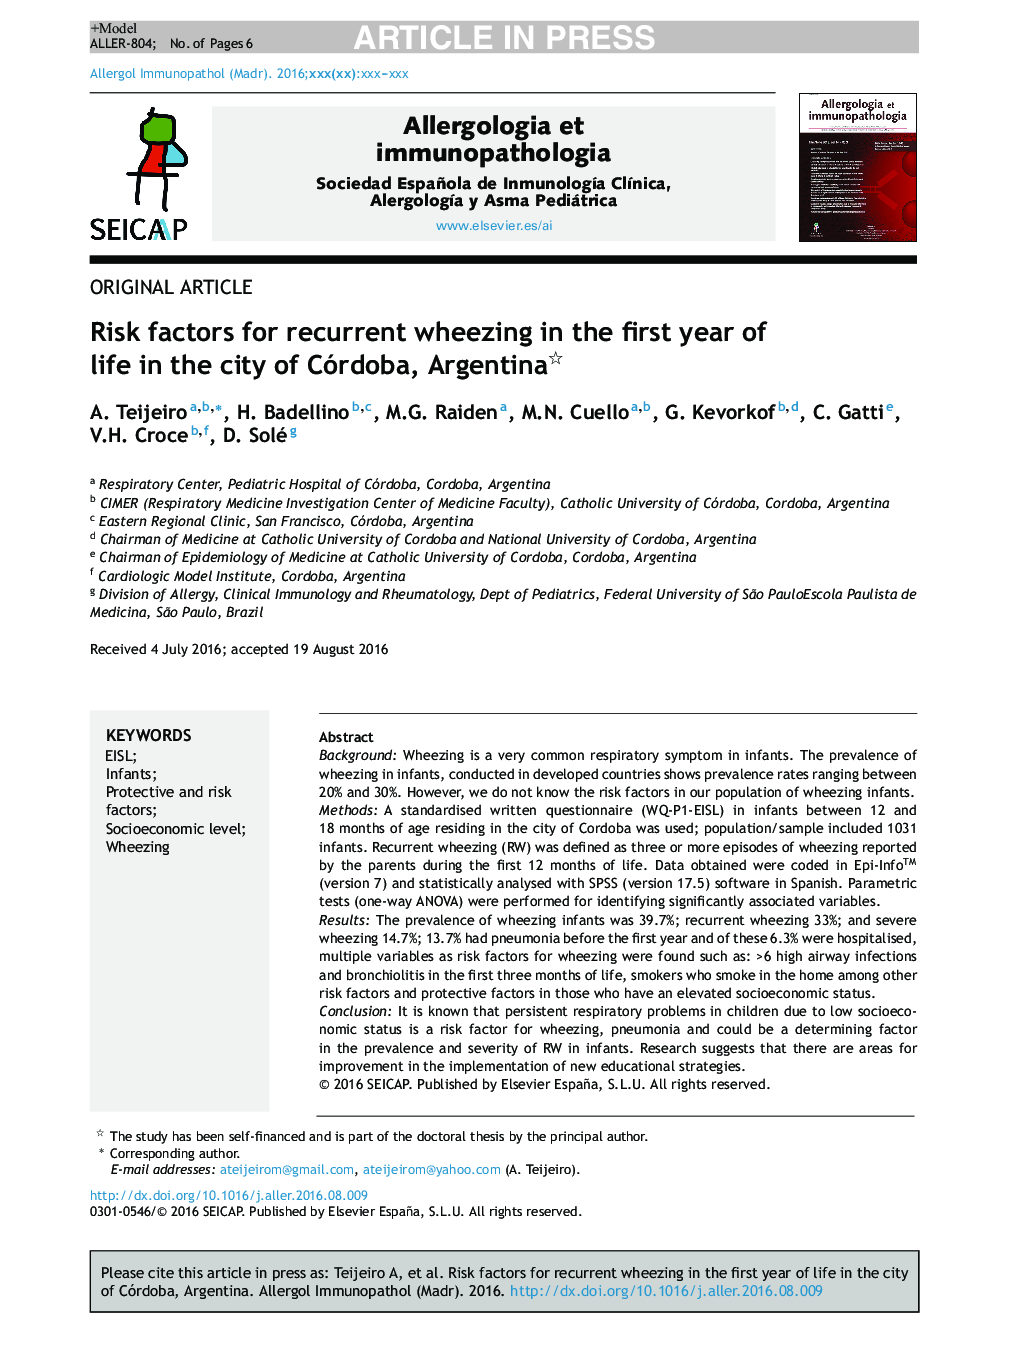 Risk factors for recurrent wheezing in the first year of life in the city of Córdoba, Argentina